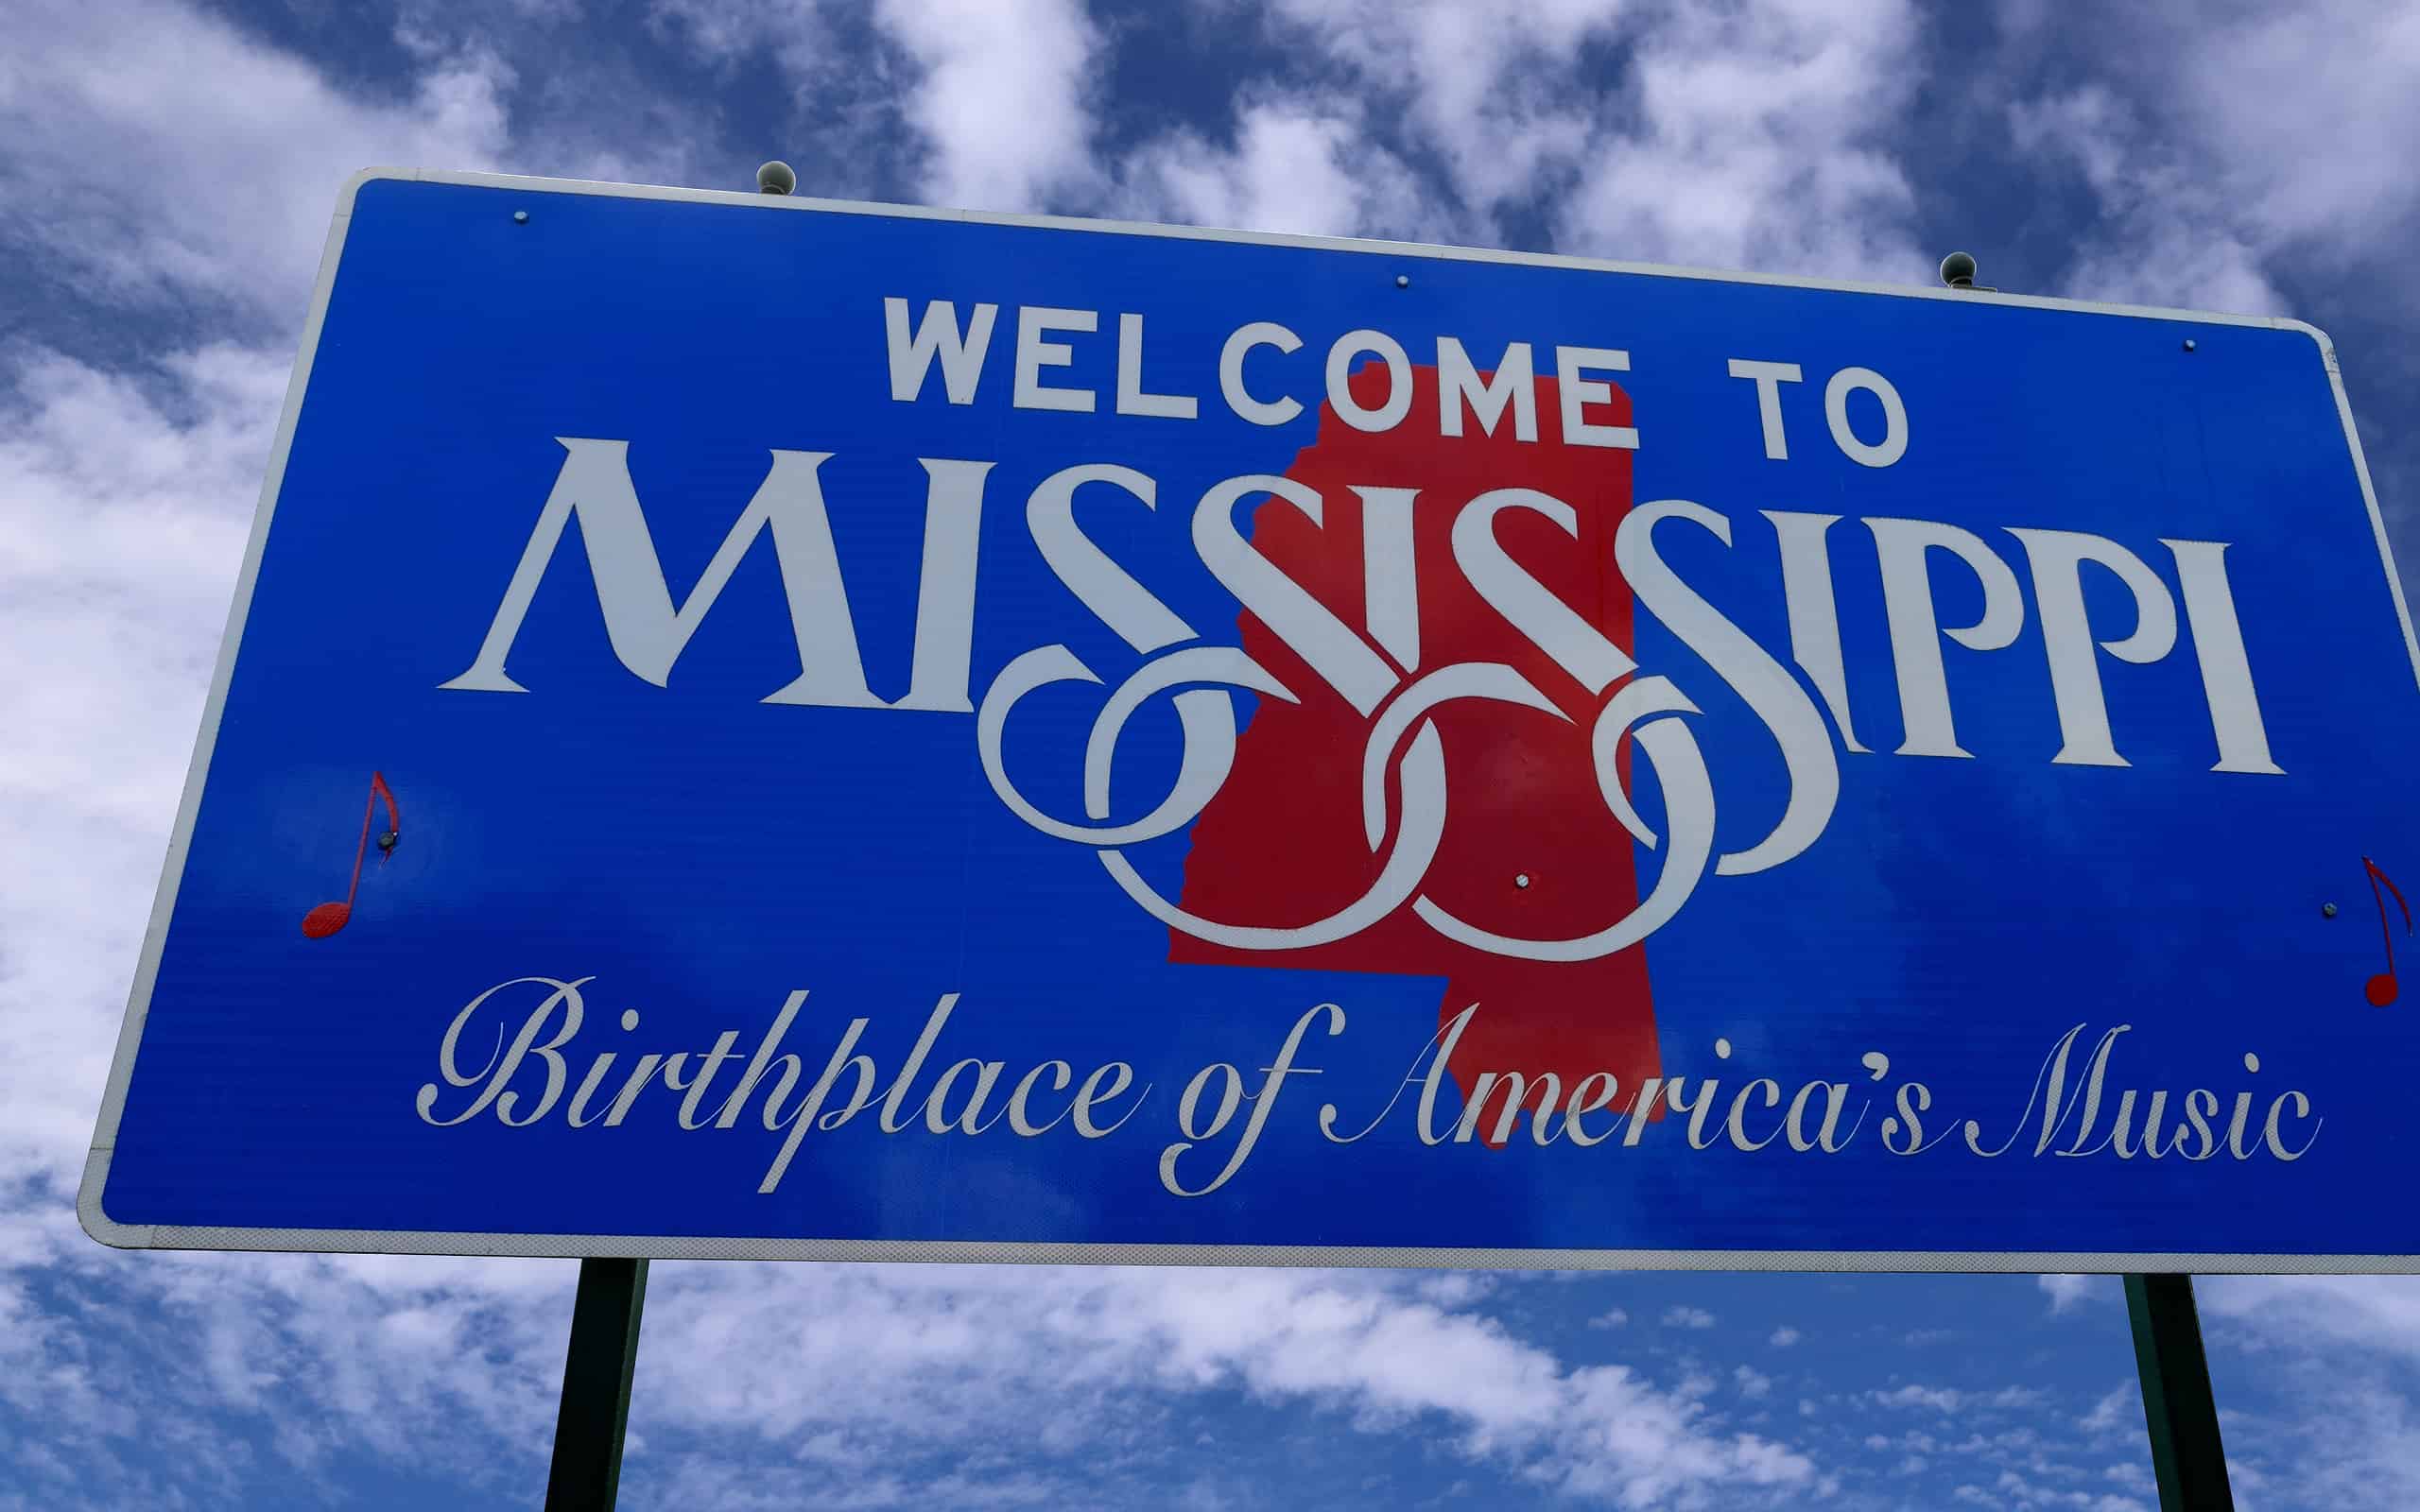 Mississippi Travel Sign with clouds